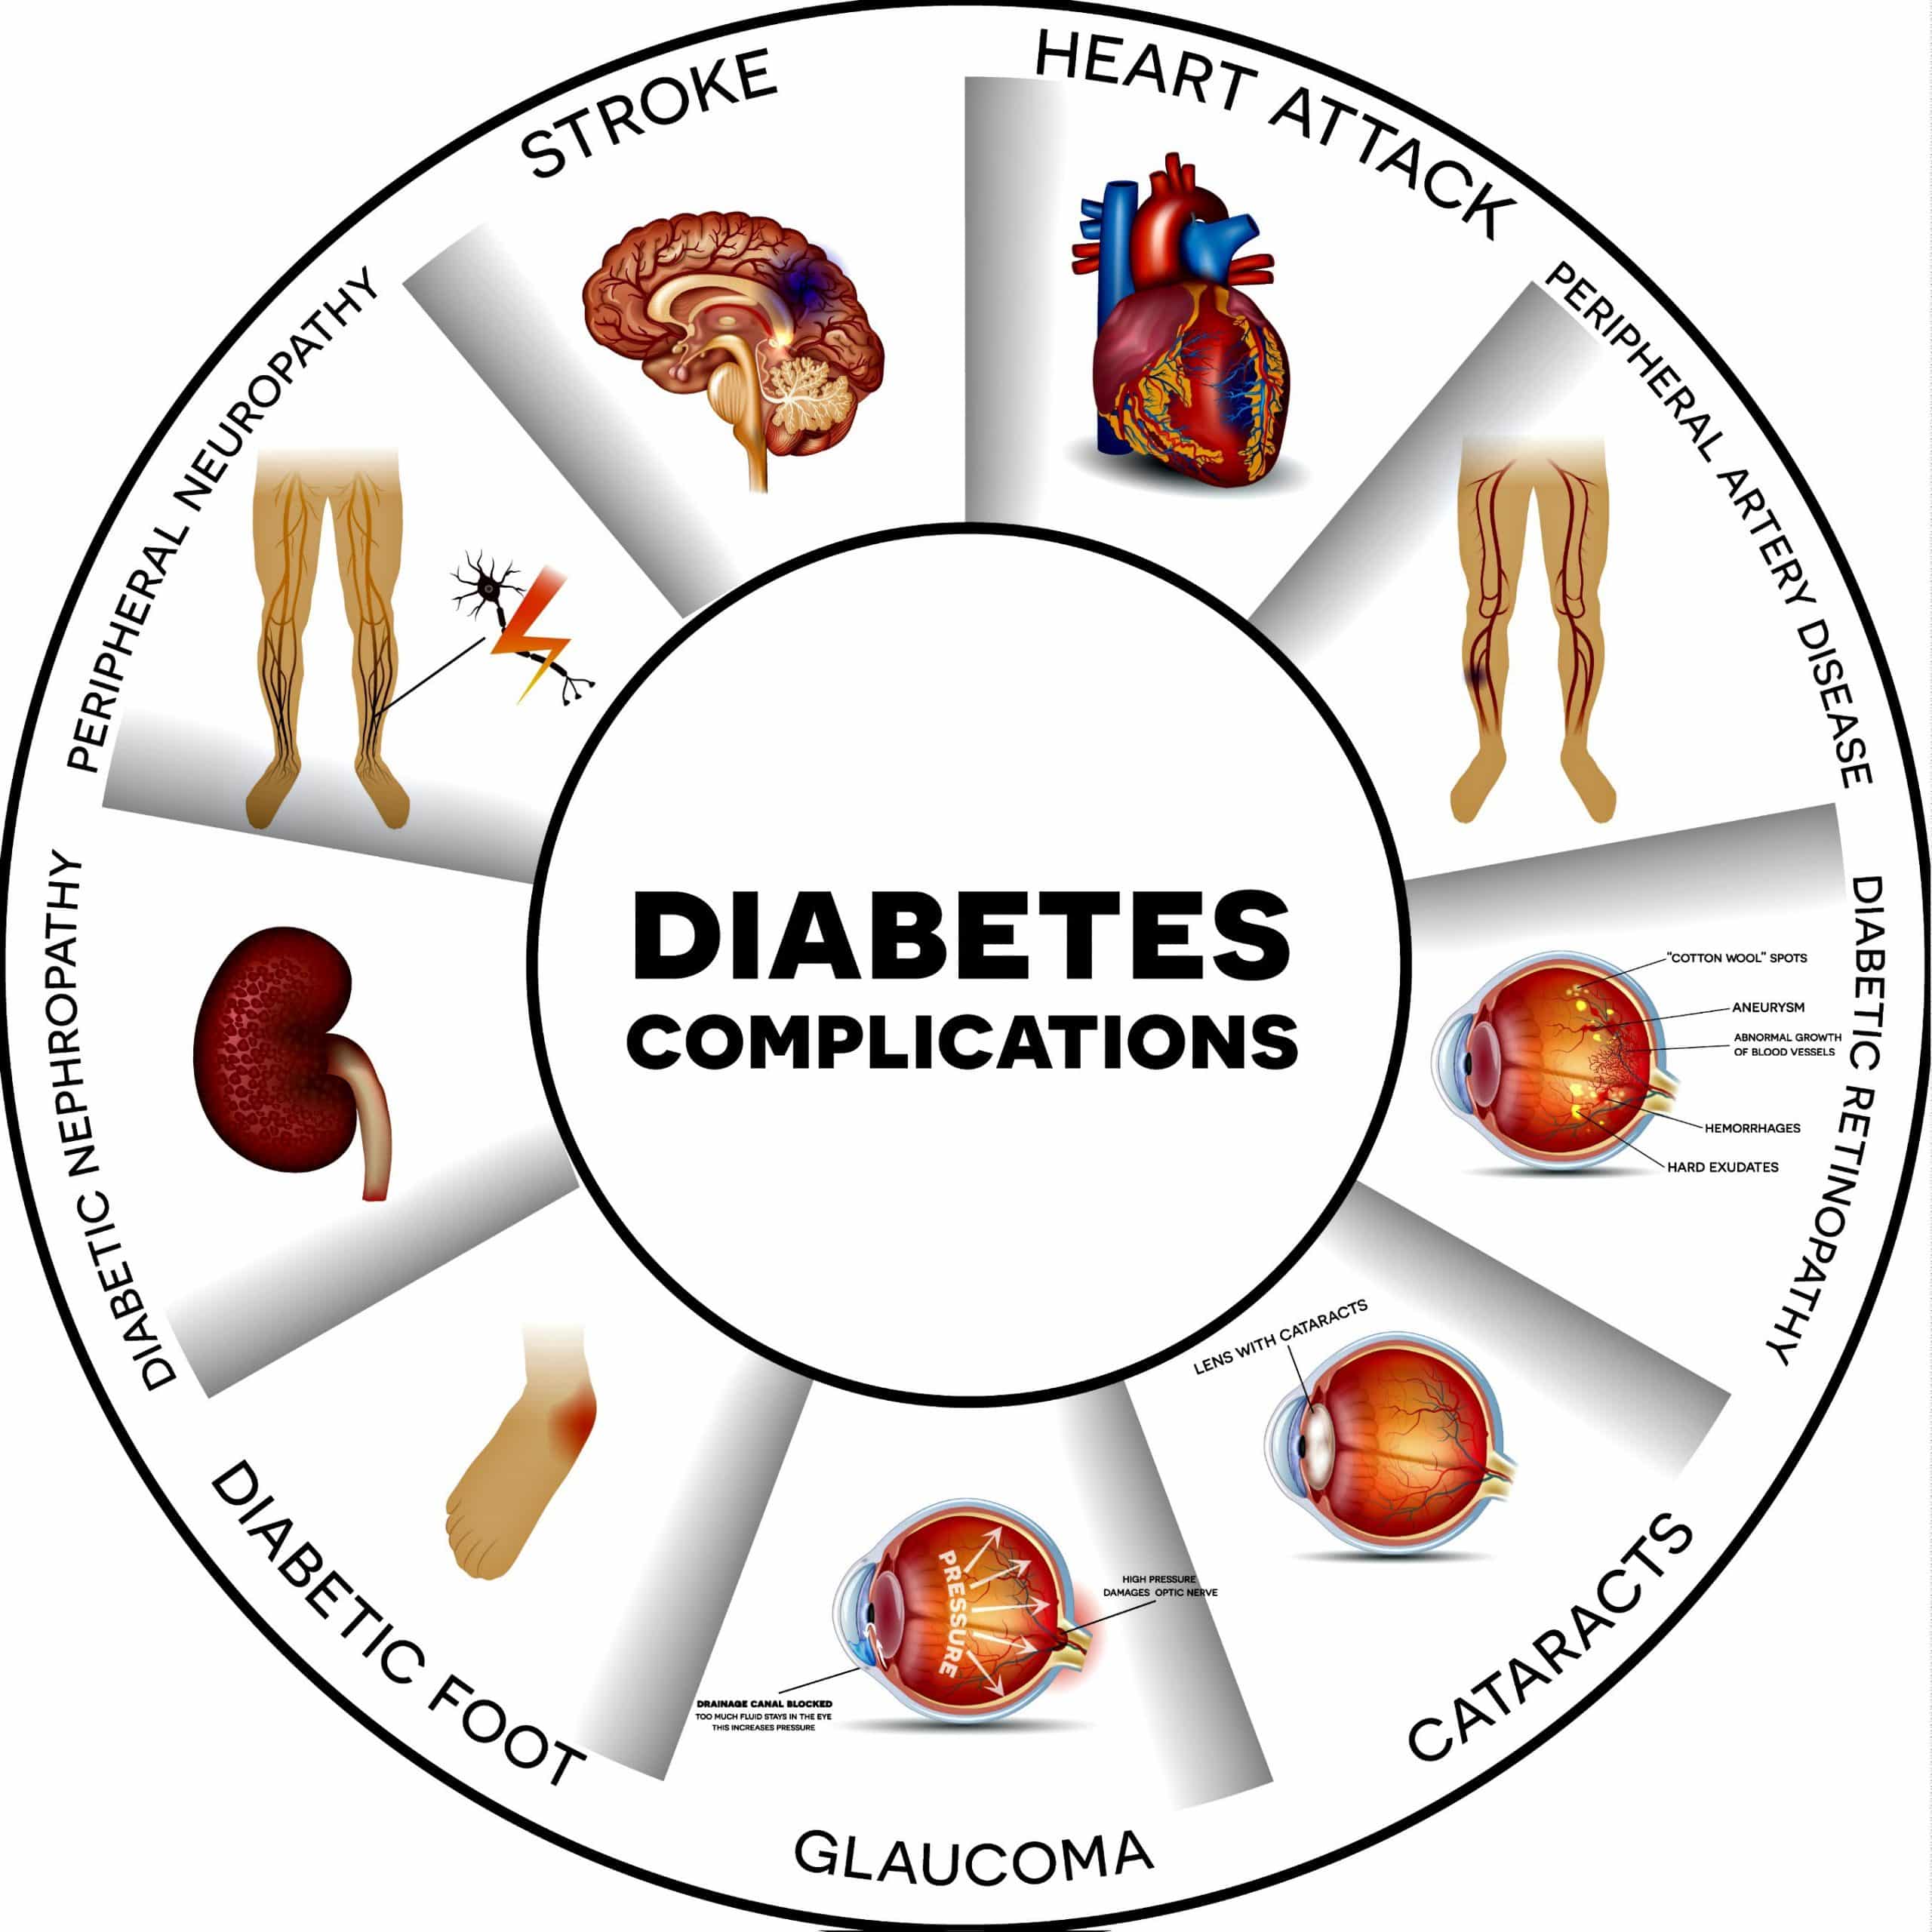 CATEGORIES OF DIABETES, SYMPTOMS, CAUSES AND THEIR TREATMENT